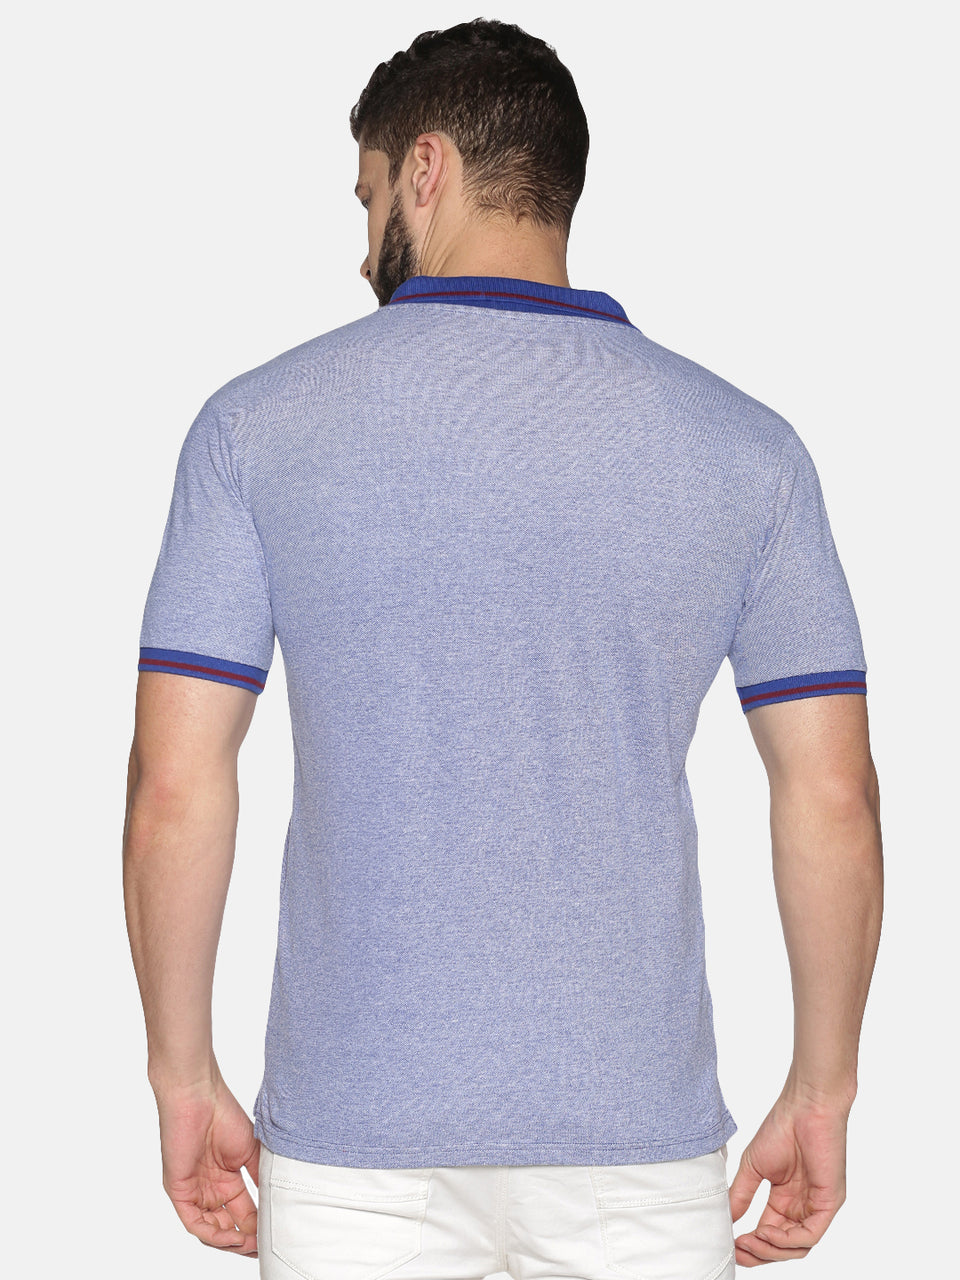 Men Blue White Red Tipping Collar Birds Eye Pique Polo Collared Neck Half Sleeve Regular Fit Casual T-Shirt with Pocket